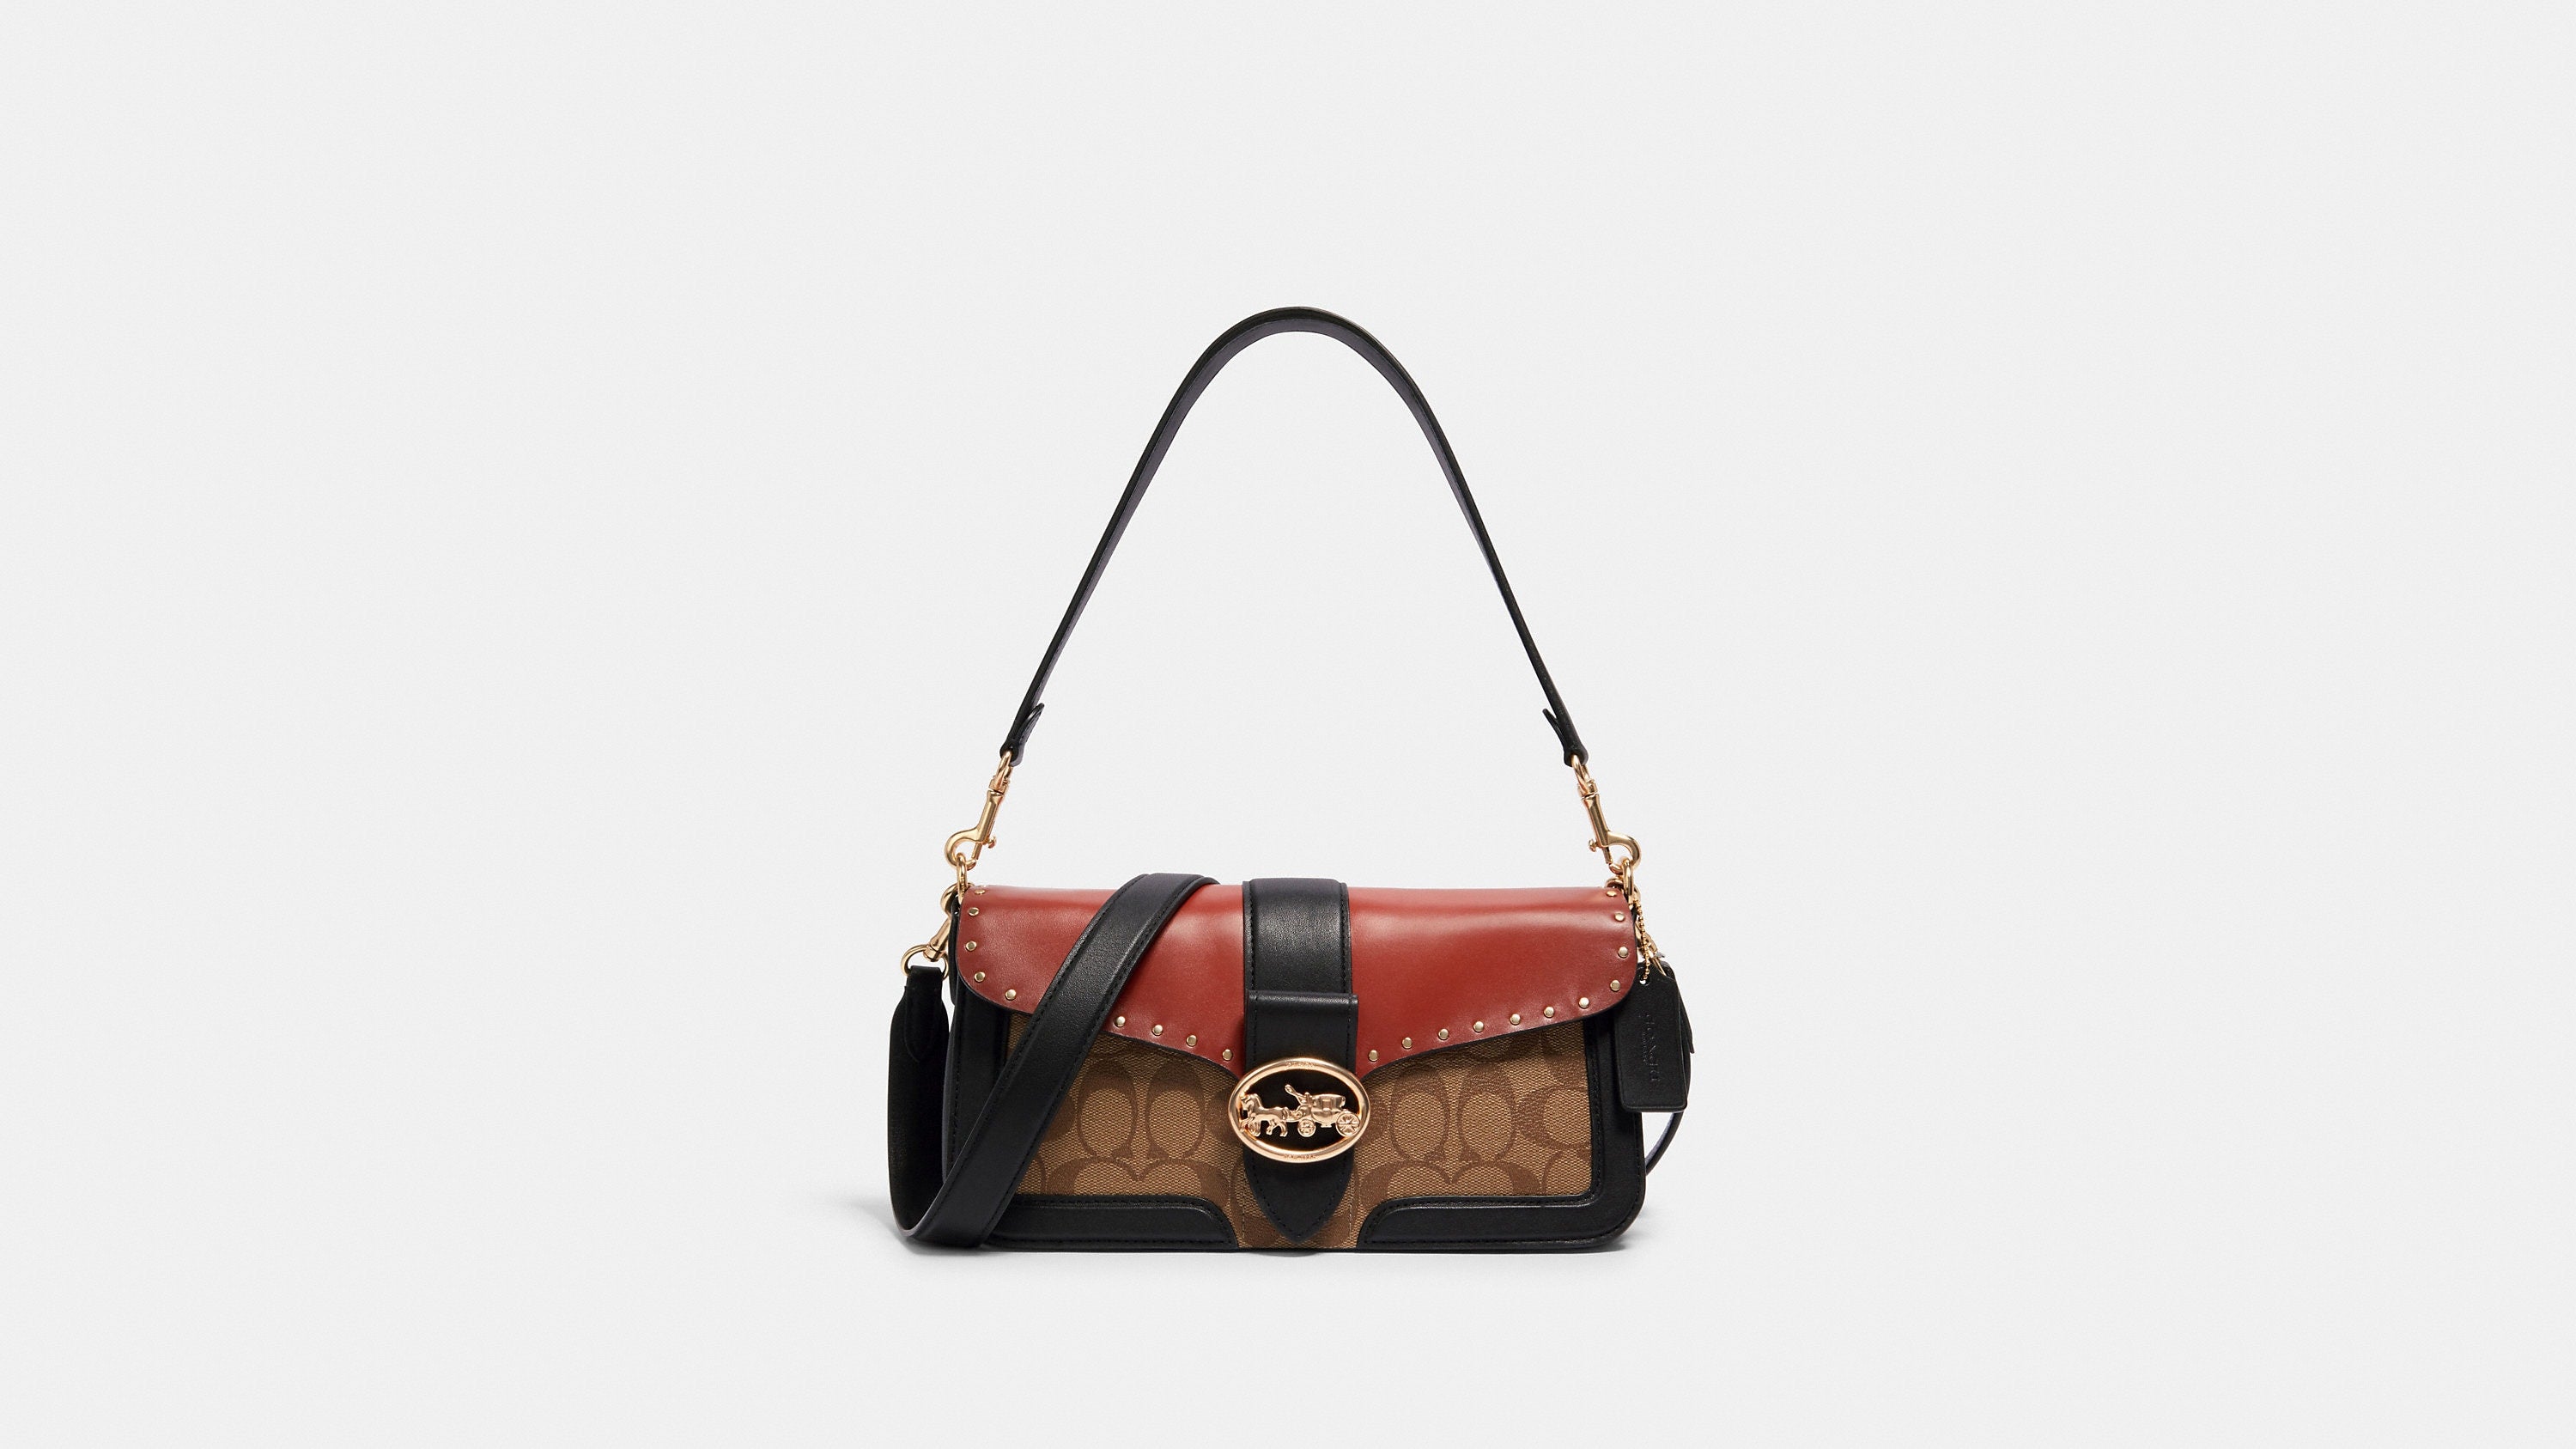 Coach Outlet Bags Are Up to 70% Off -- Shop Our Picks